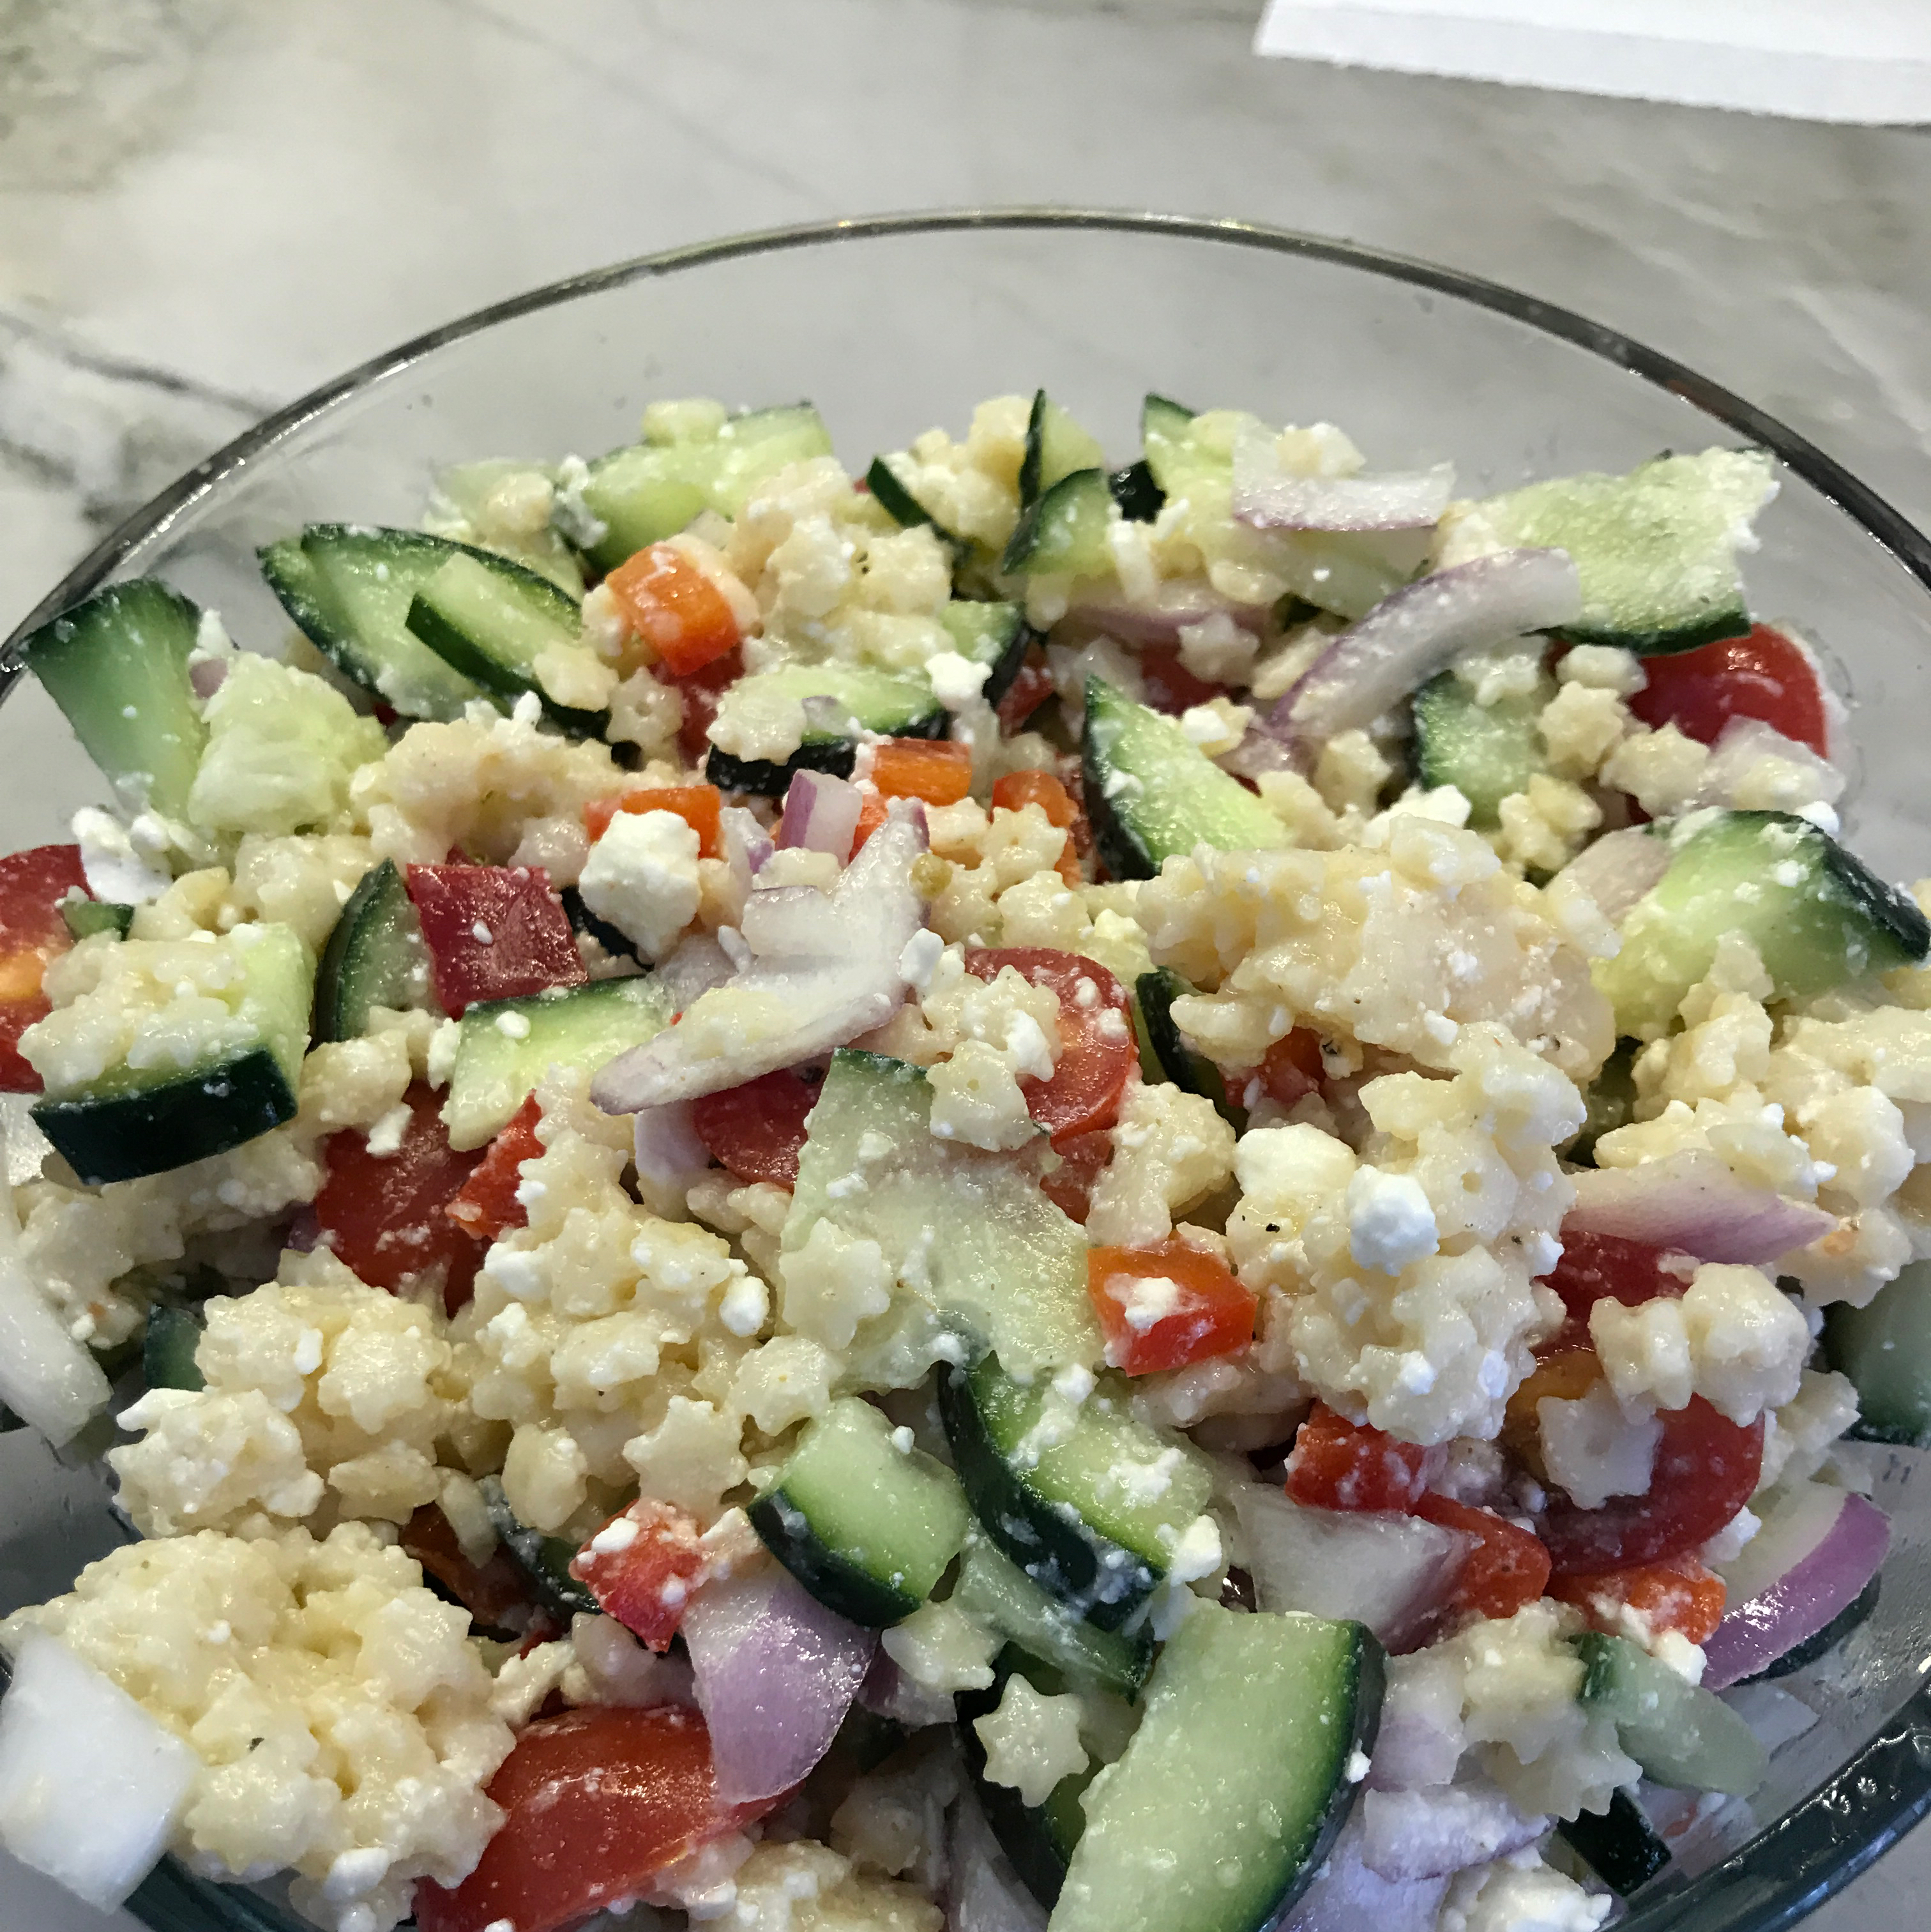 Orzo with Feta, Cucumber and Tomato